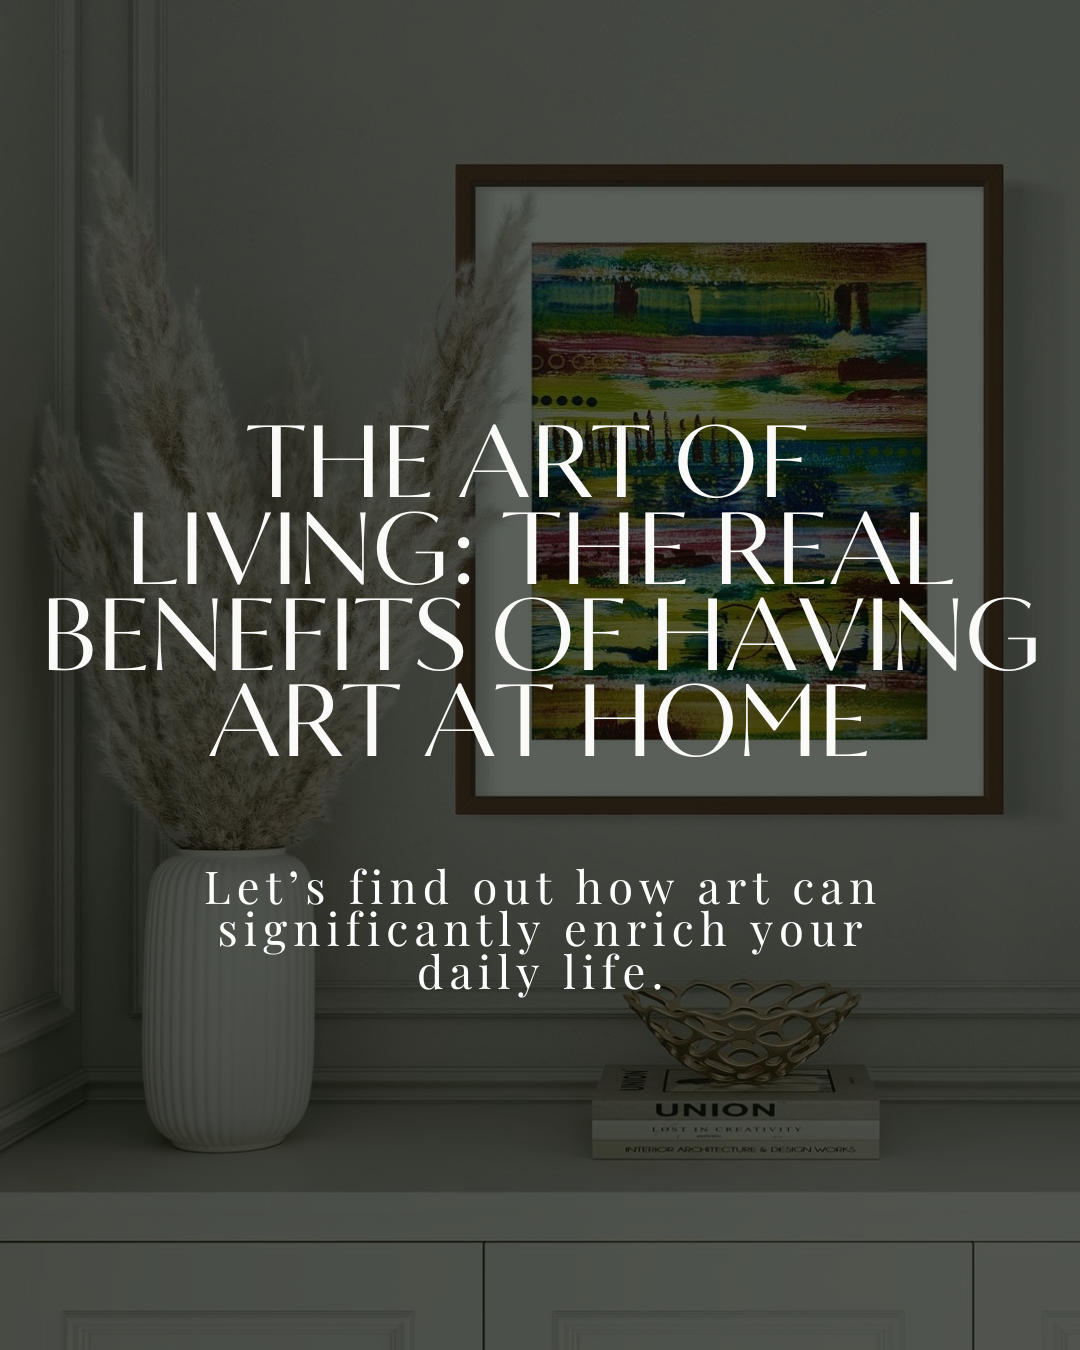 The Art of Living: The Real Benefits of Having Art at Home